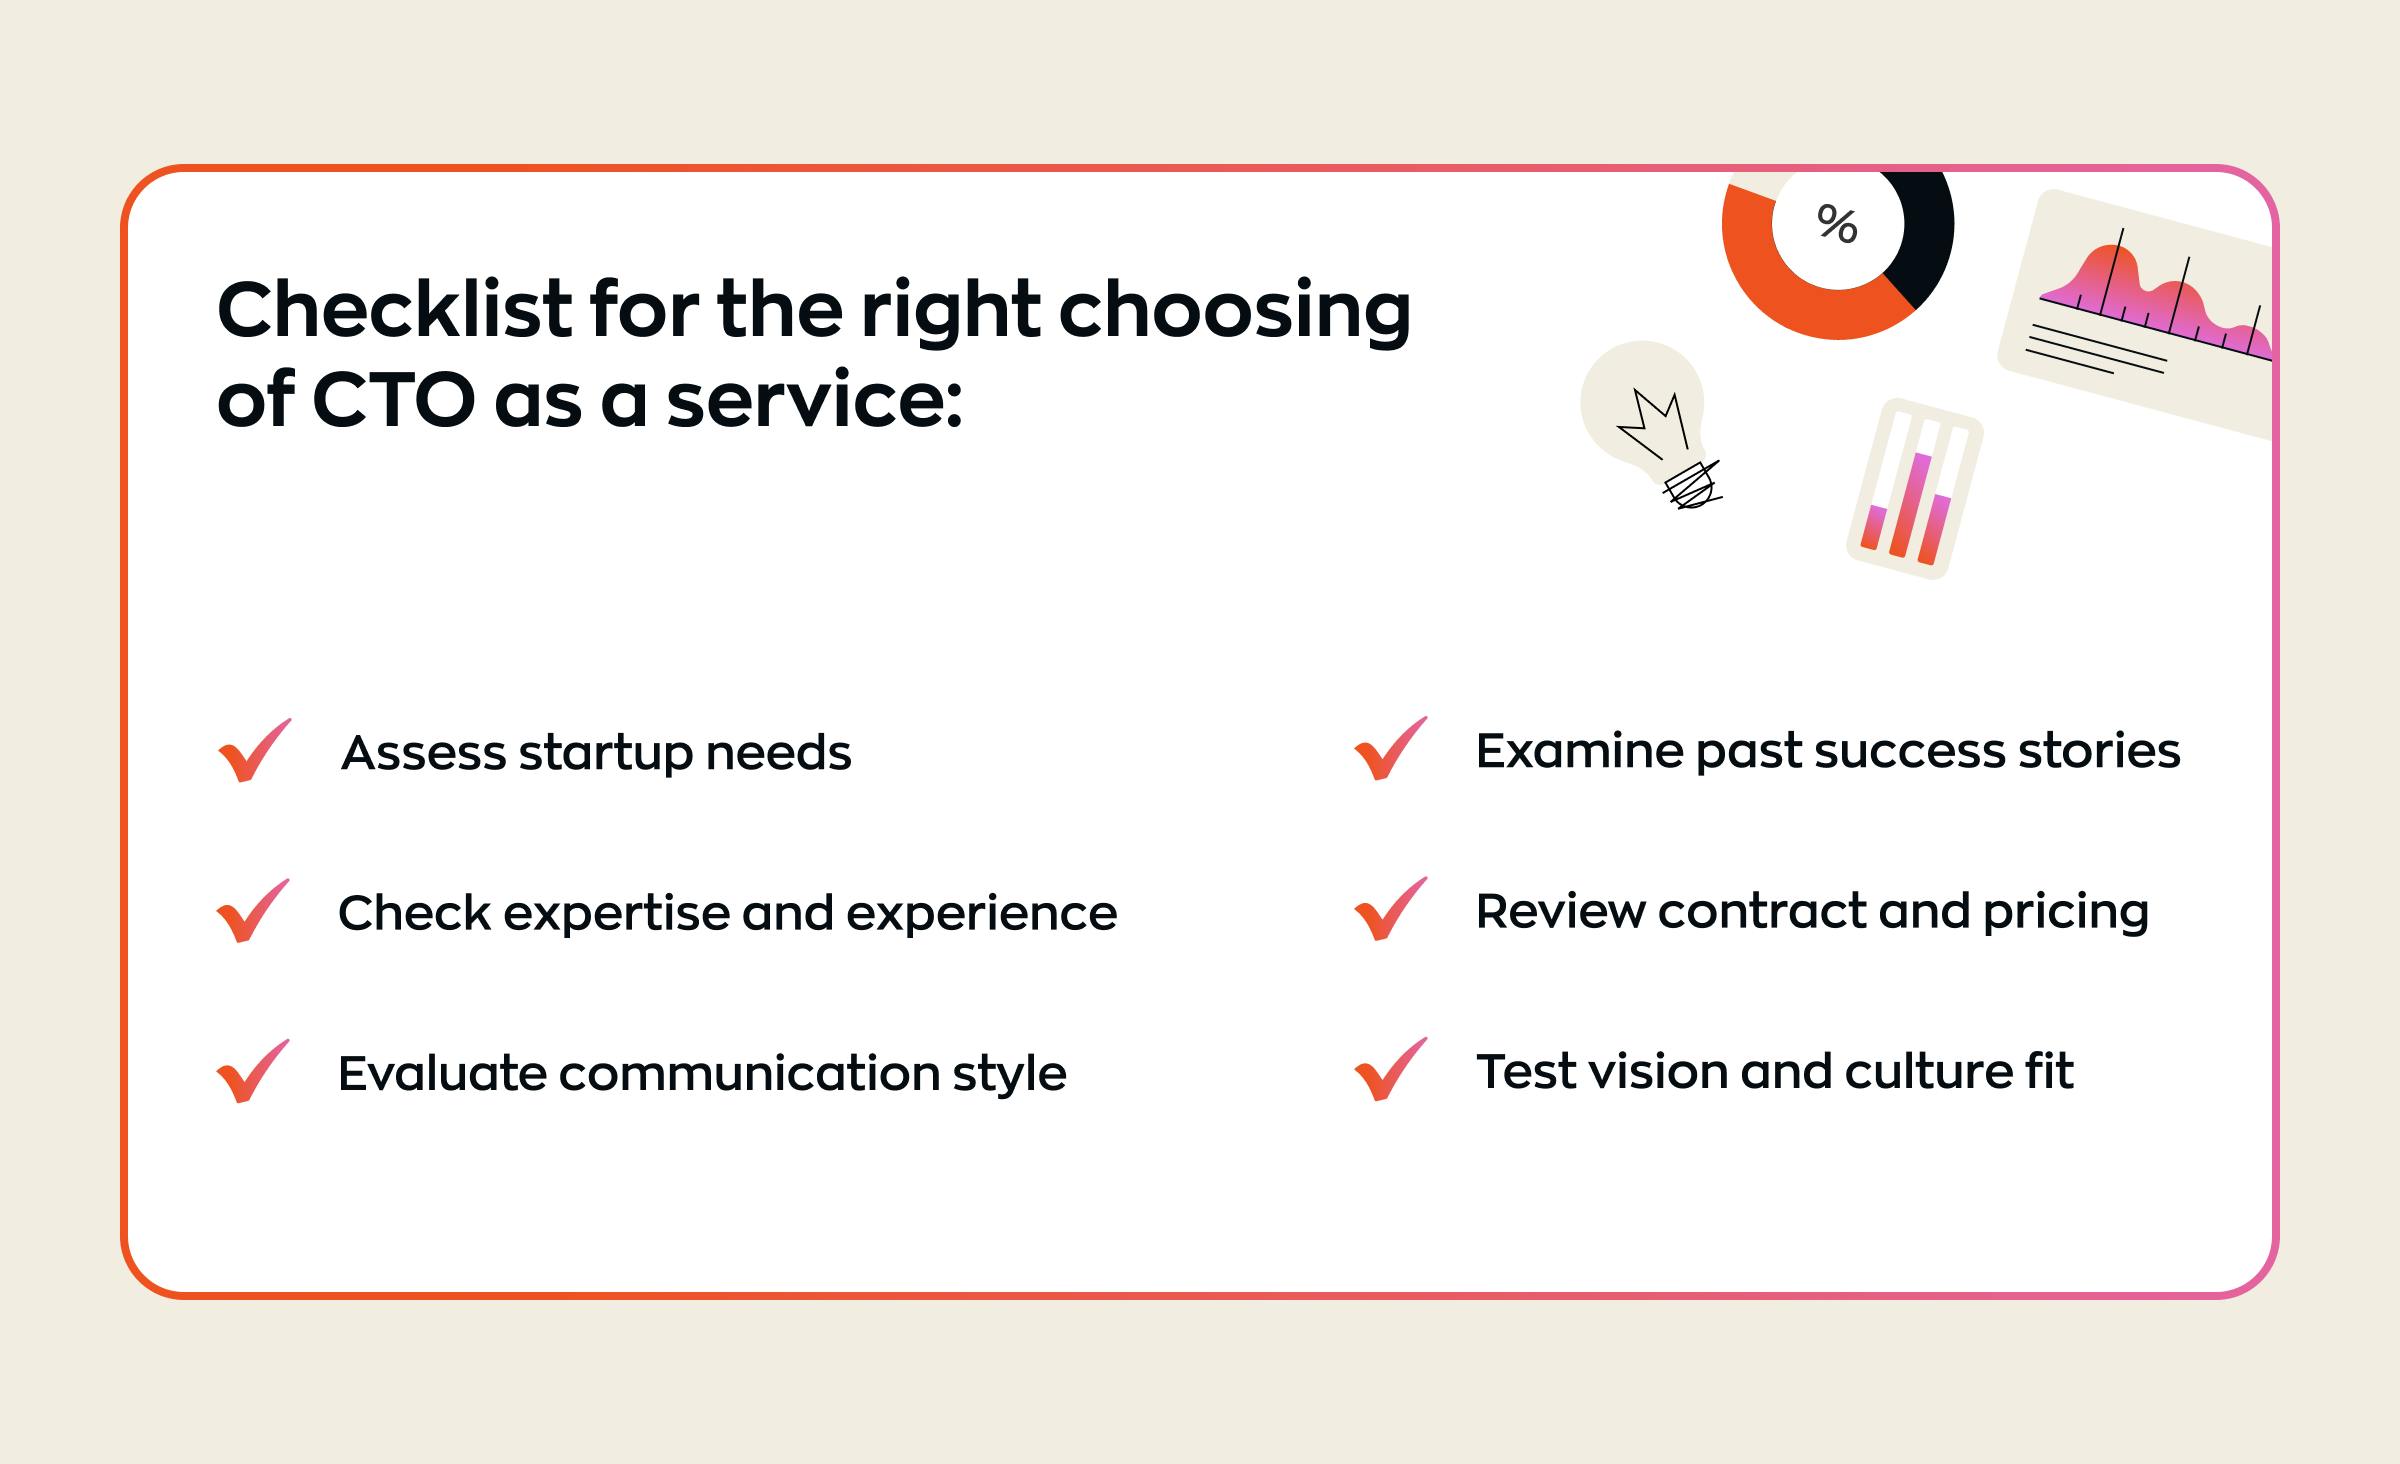 hecklist of criteria for selecting the right CTO as a service for the startup